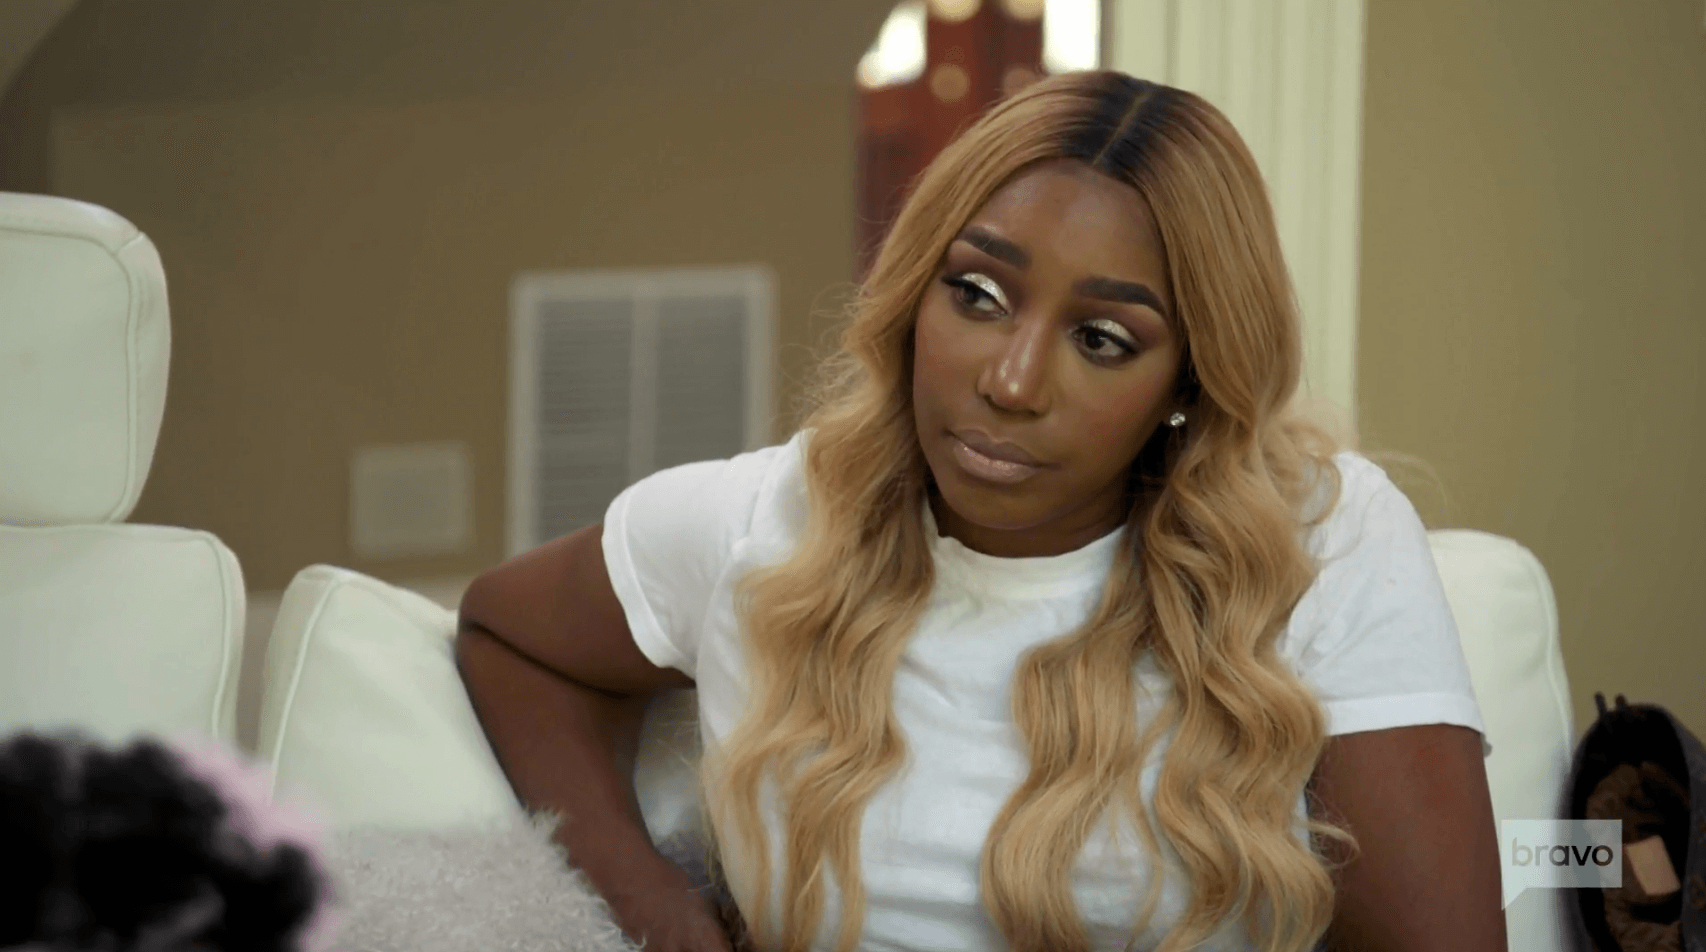 NeNe Leakes Reveals She Was Only Offered to Film 6 Episodes of ‘RHOA’ Season 13